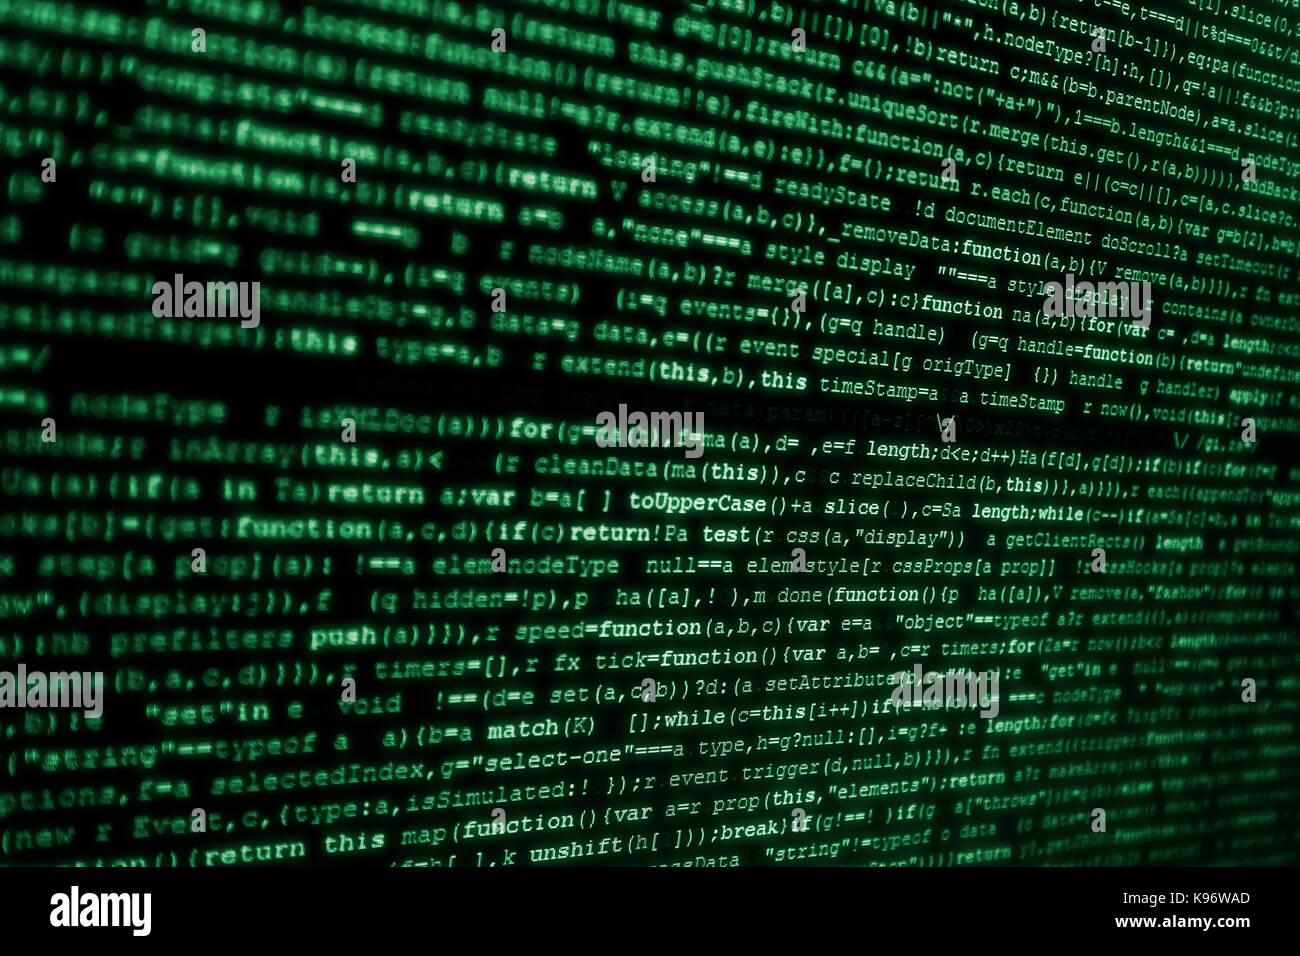 Internet concept, javascript code. Language web pages, computers, network, web. Black background with green text like old CRT monitors, matrix style. Stock Photo